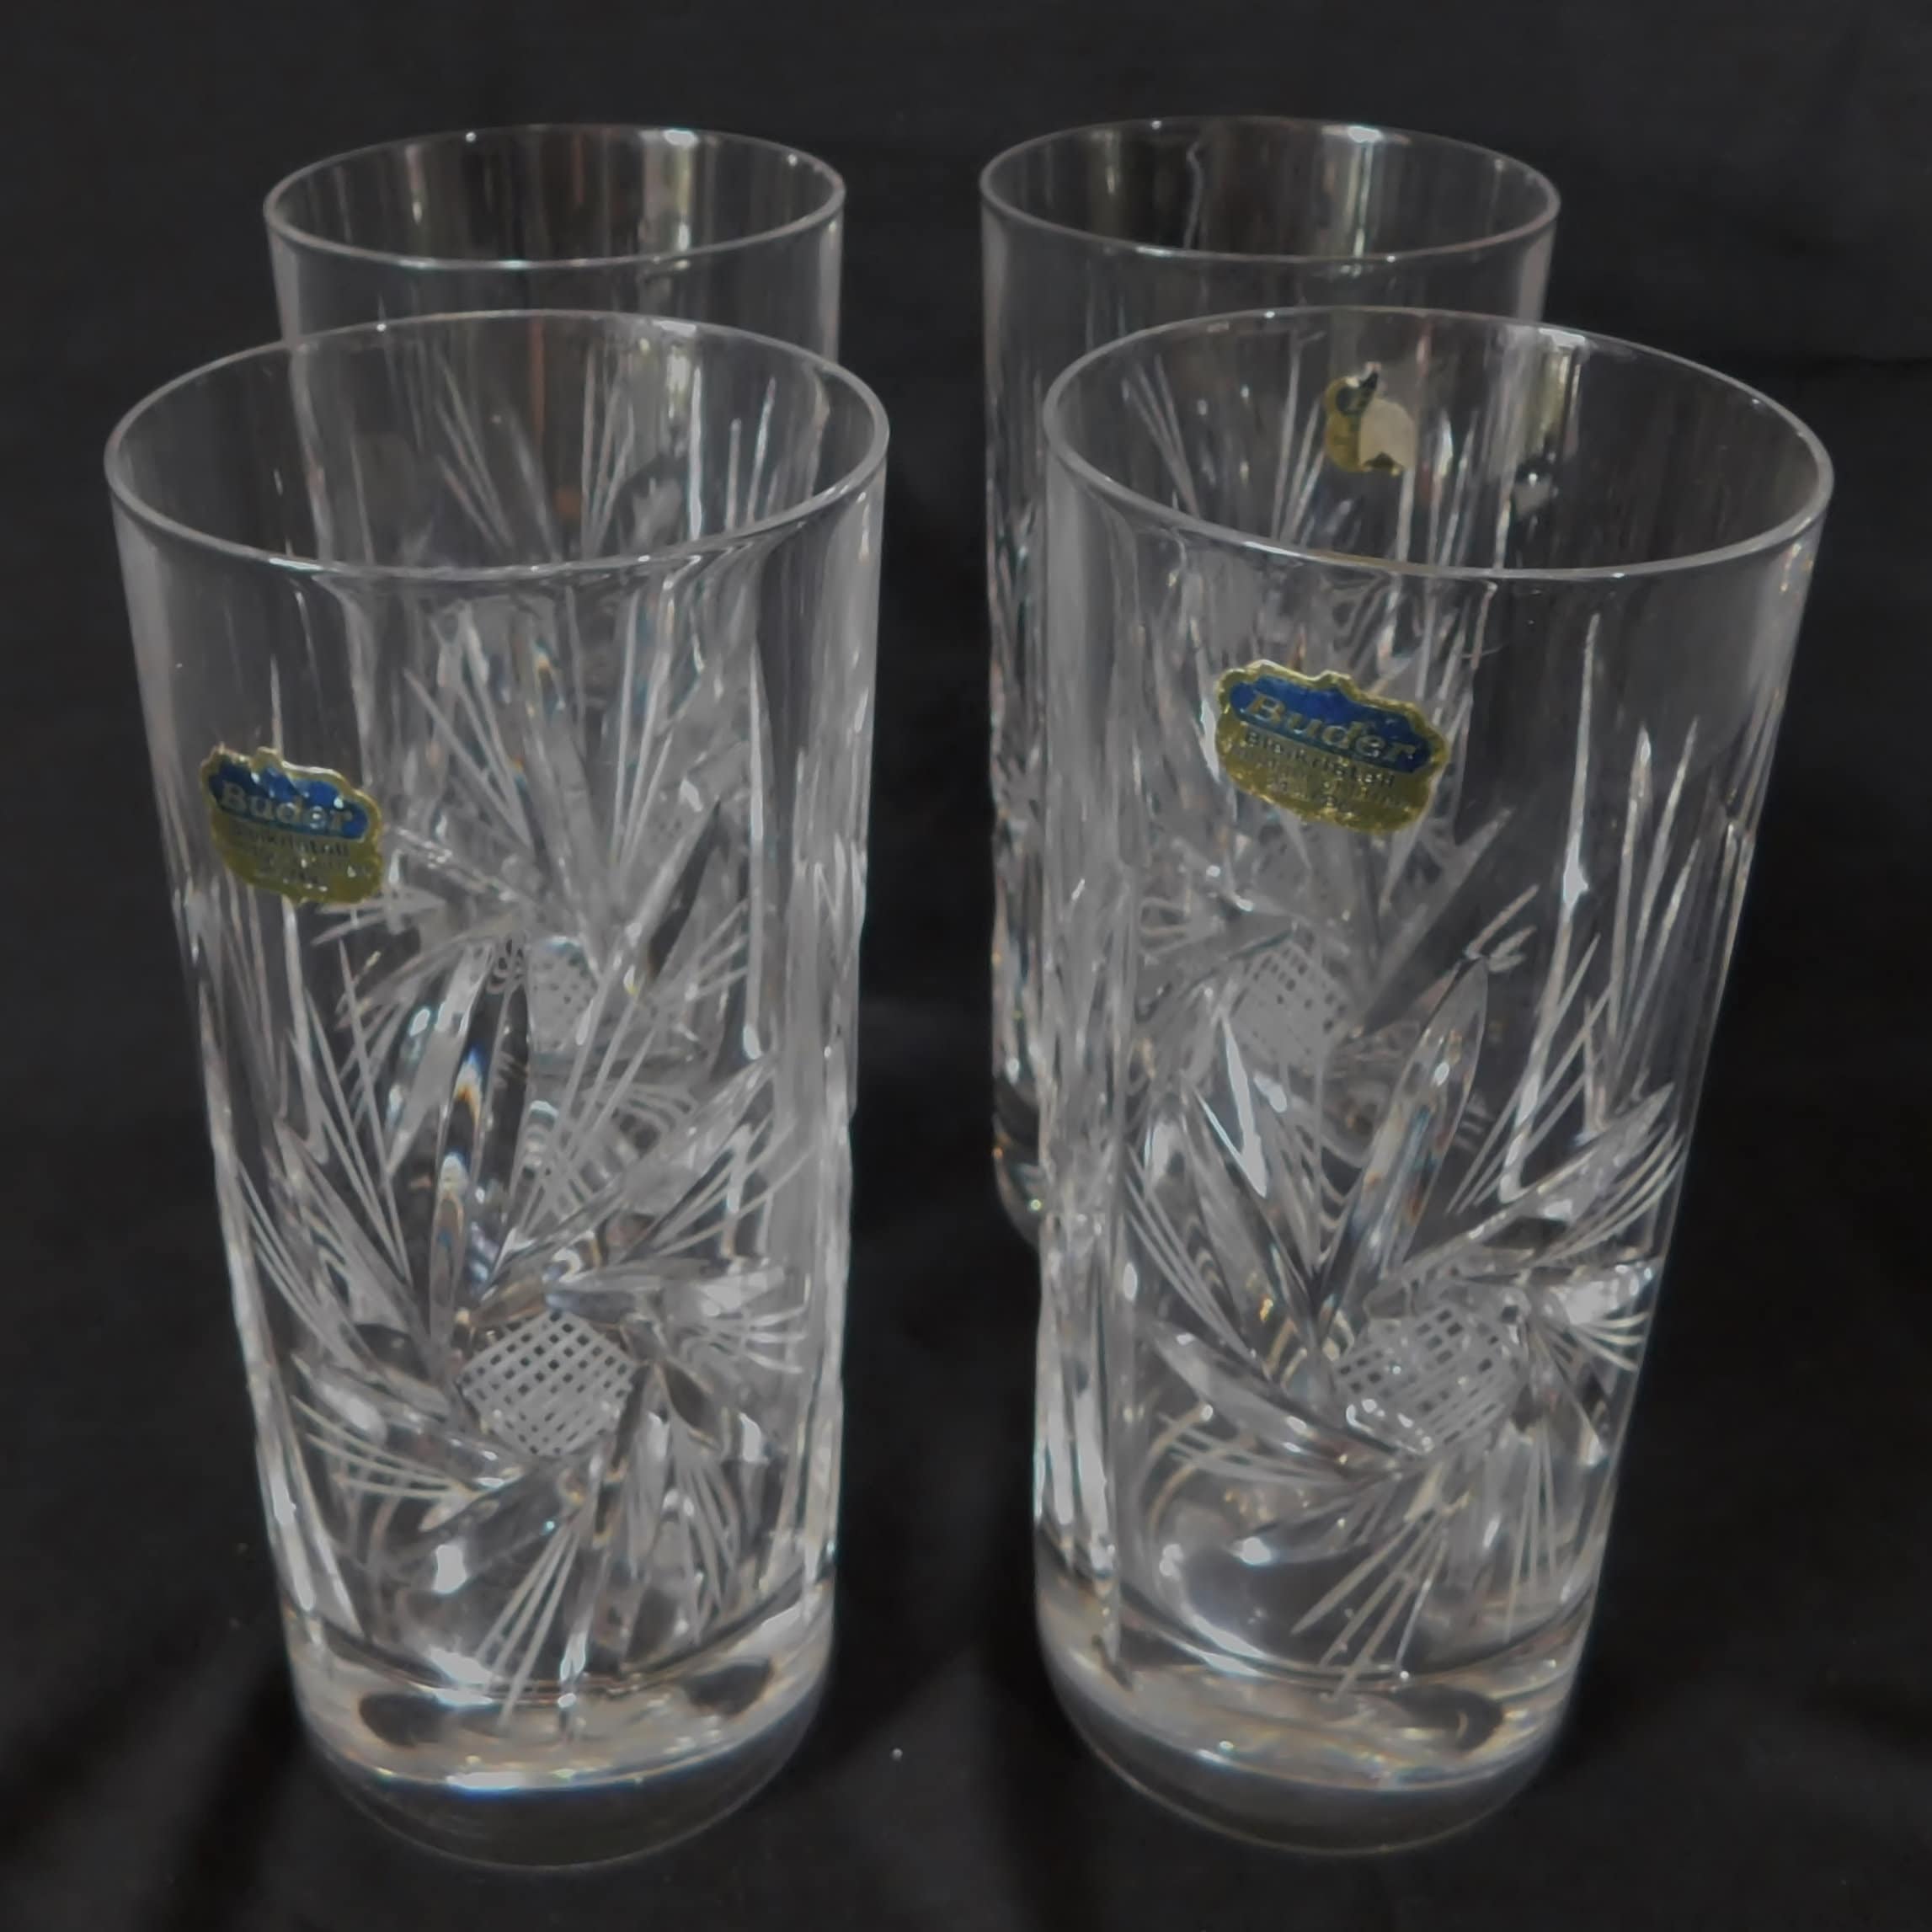 Lead-free Crystal Drinking Glasses Set - Hand-cutting Everyday